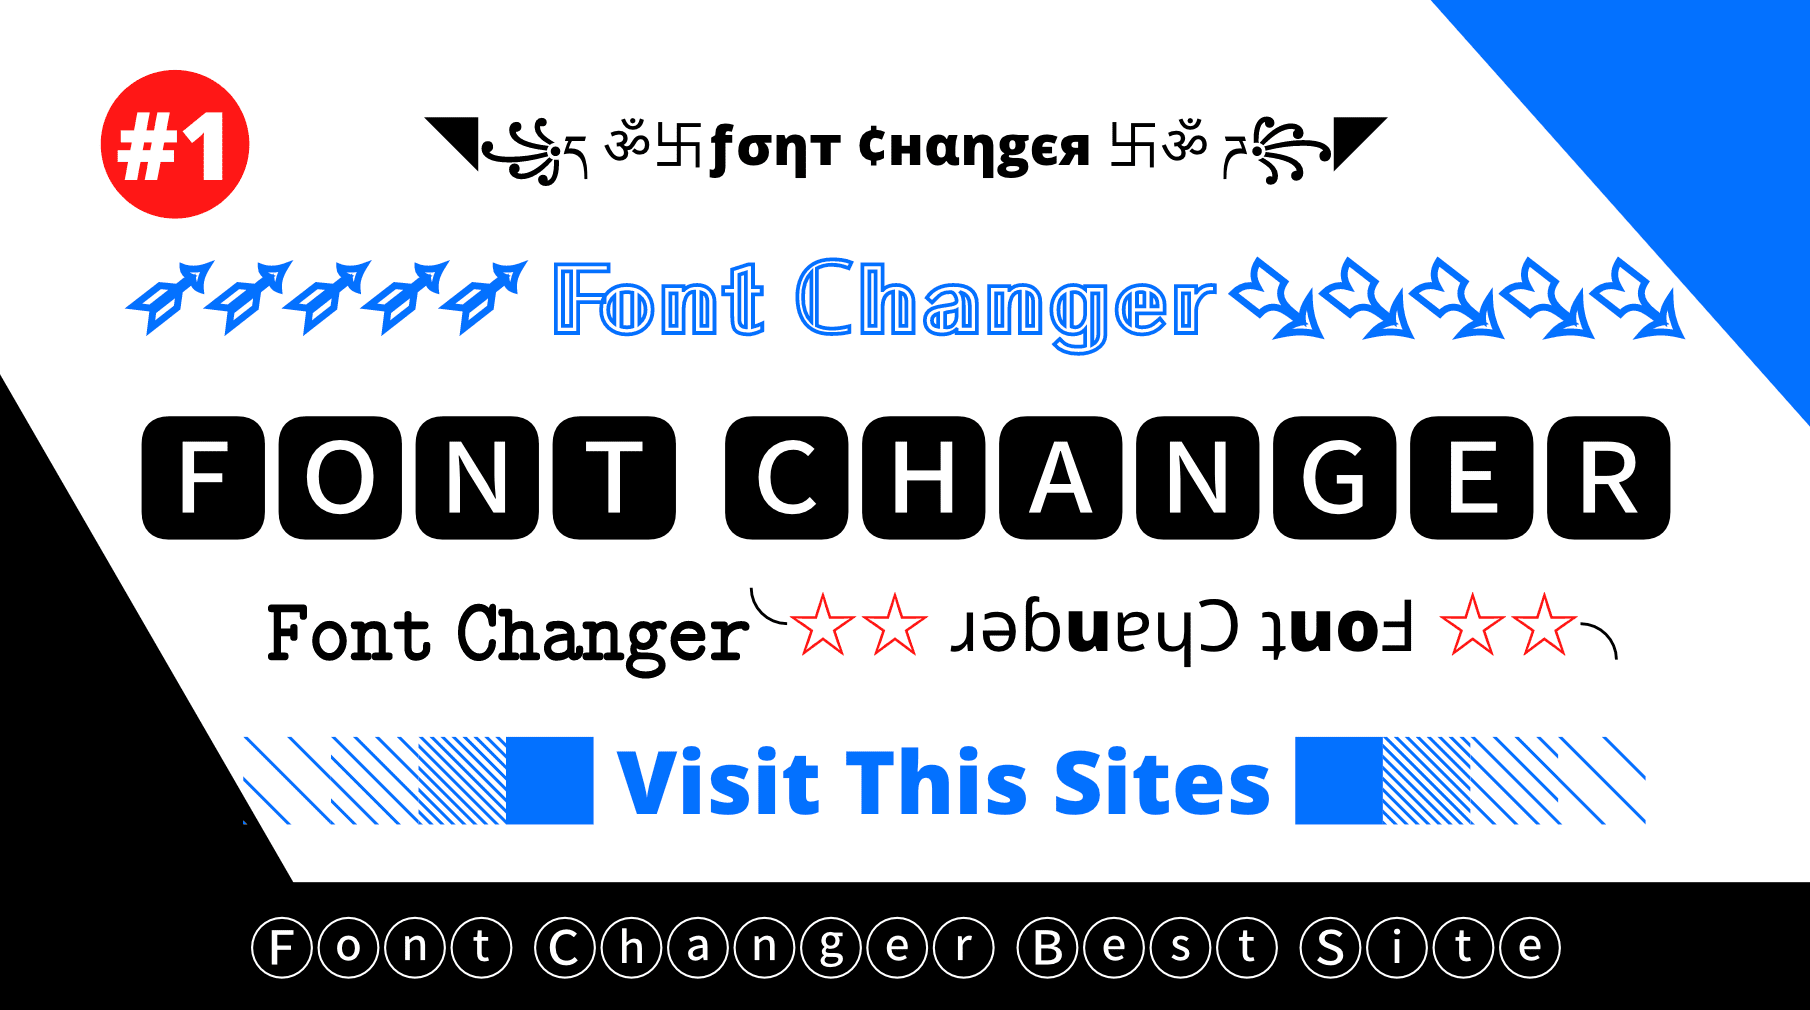 Cool Text Fonts Changer